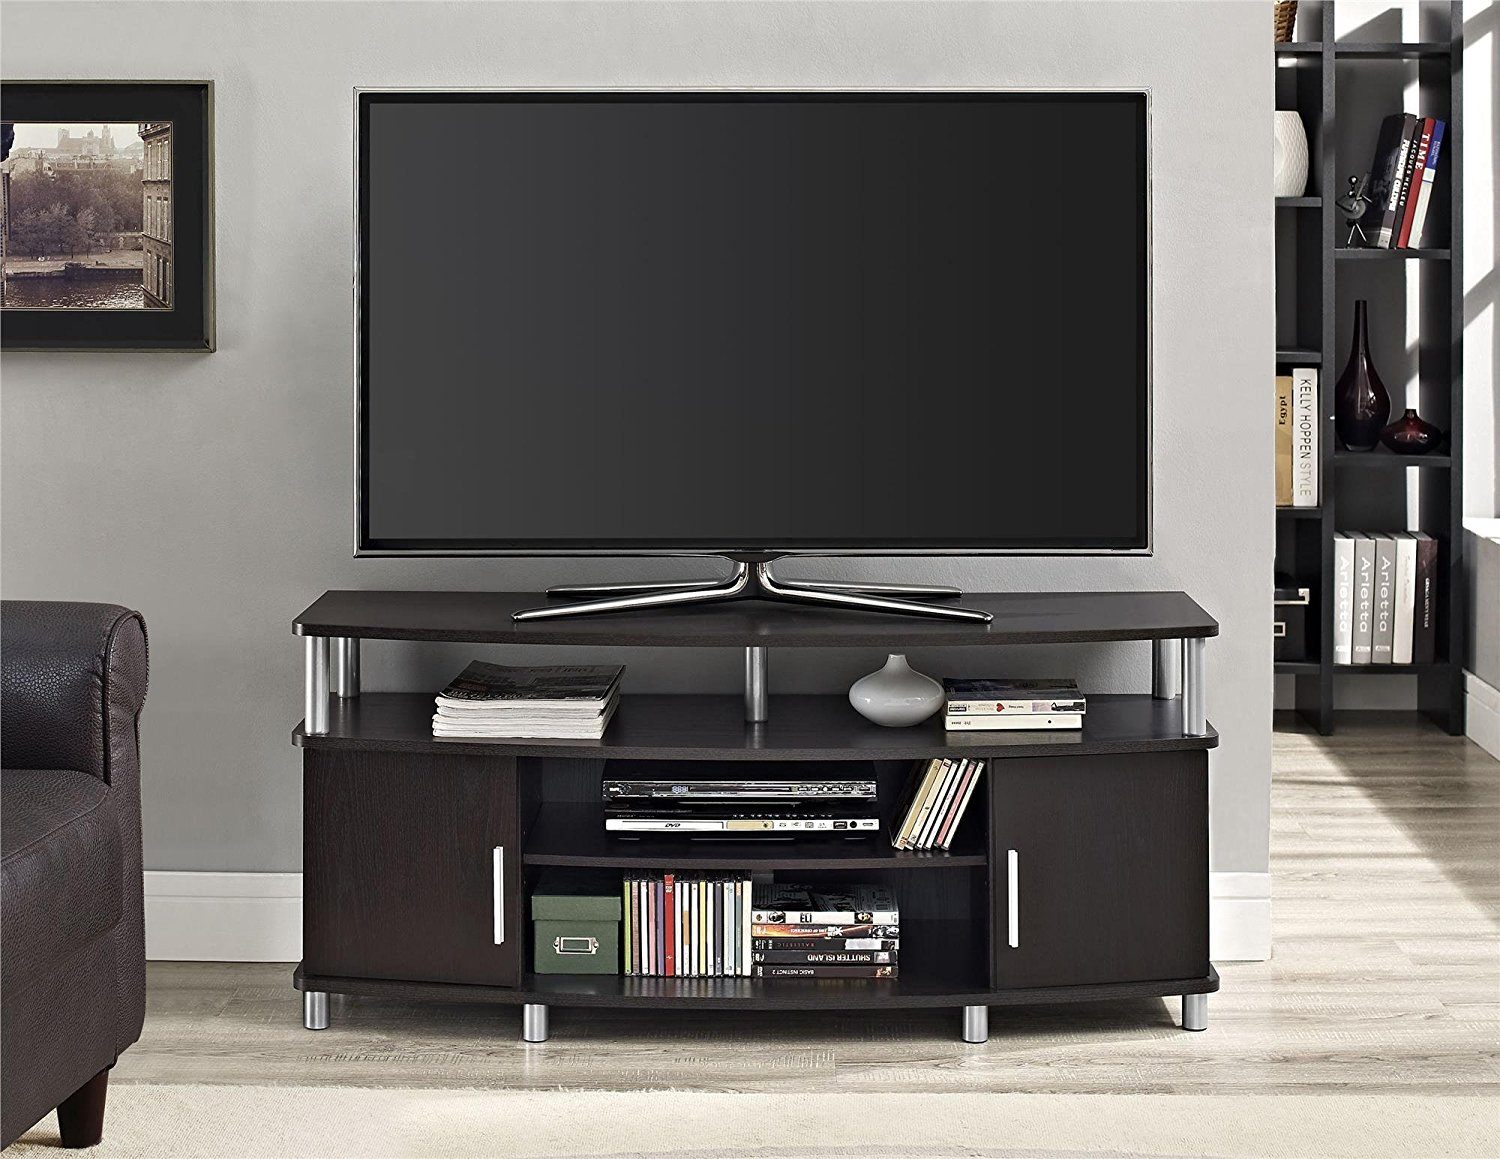 TV on TV stand